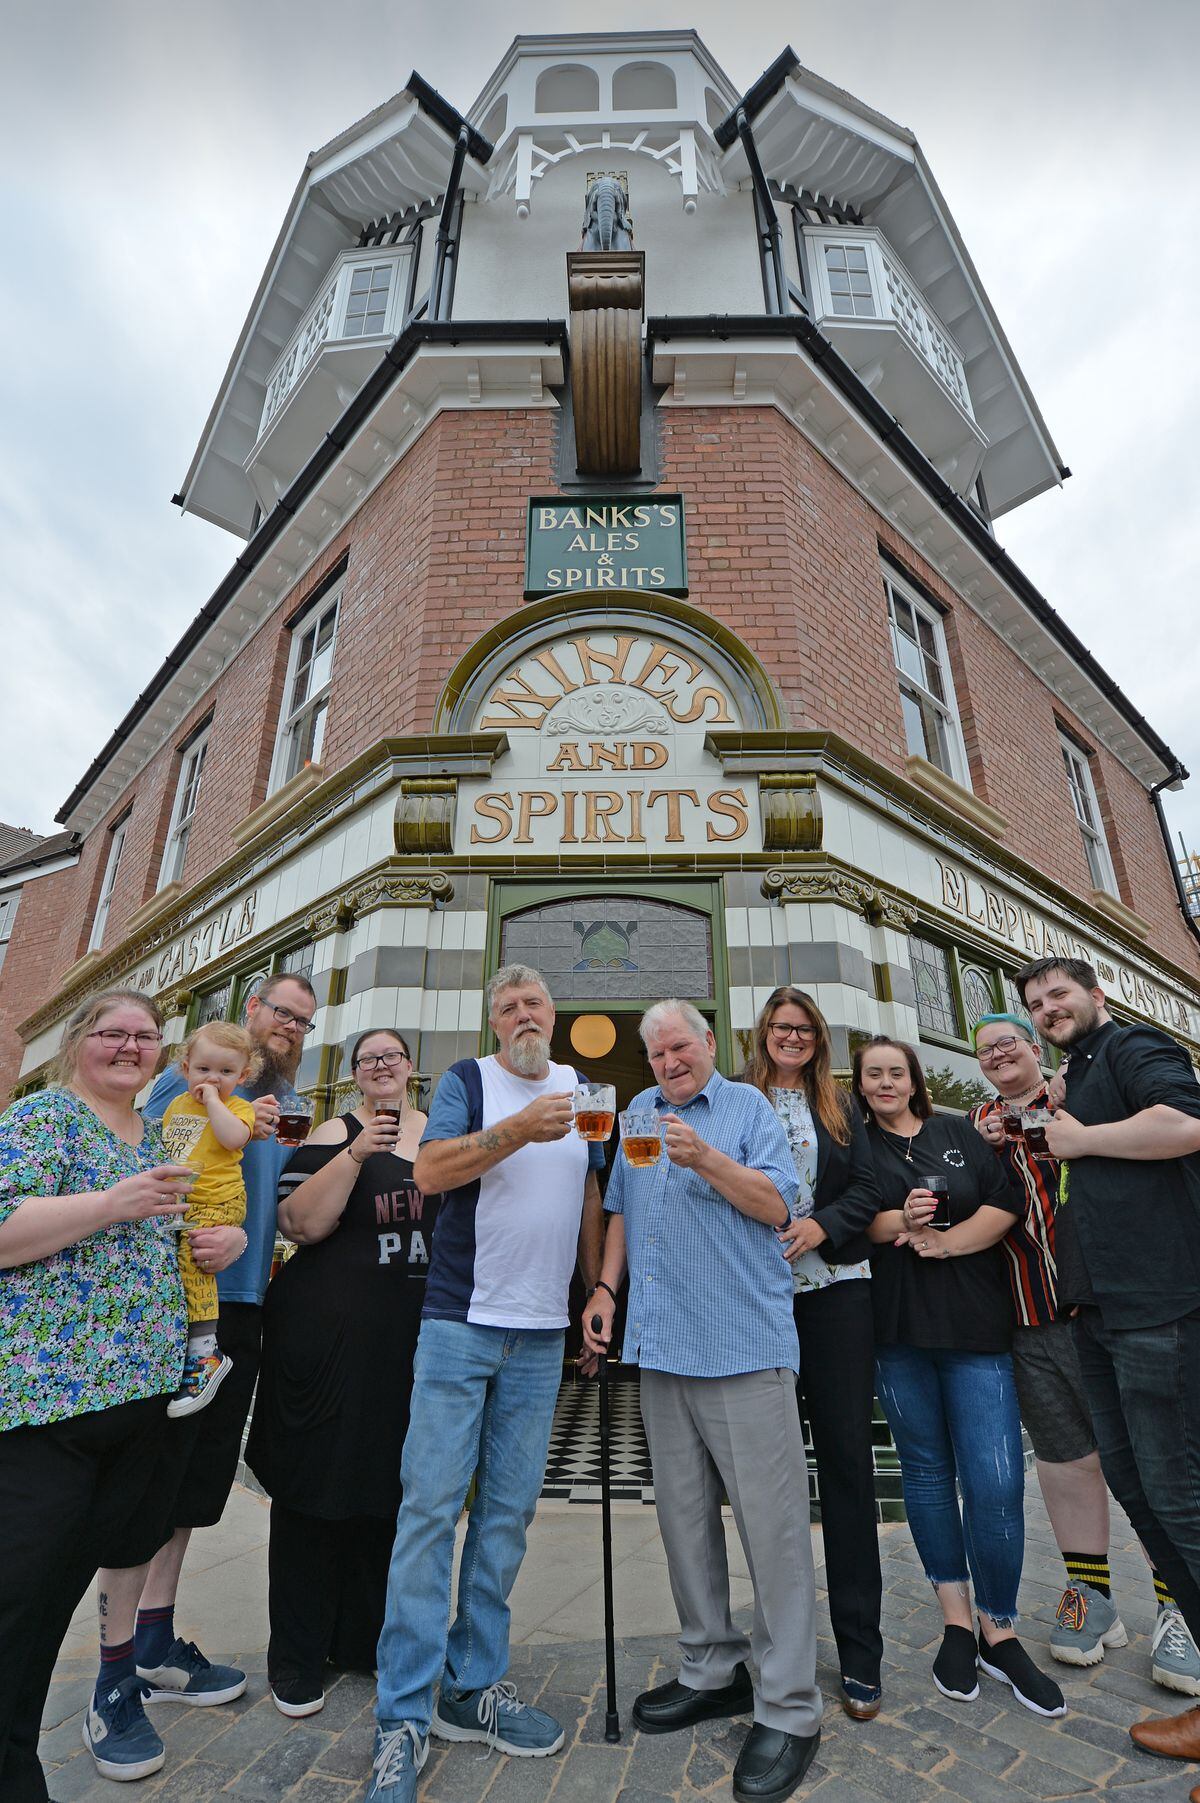 Toasting the pub's good fortune are (front center left) Roy Mincher and his family who lived in the pub in the 1970s and (front right) former owner 1978-79 John Purchase